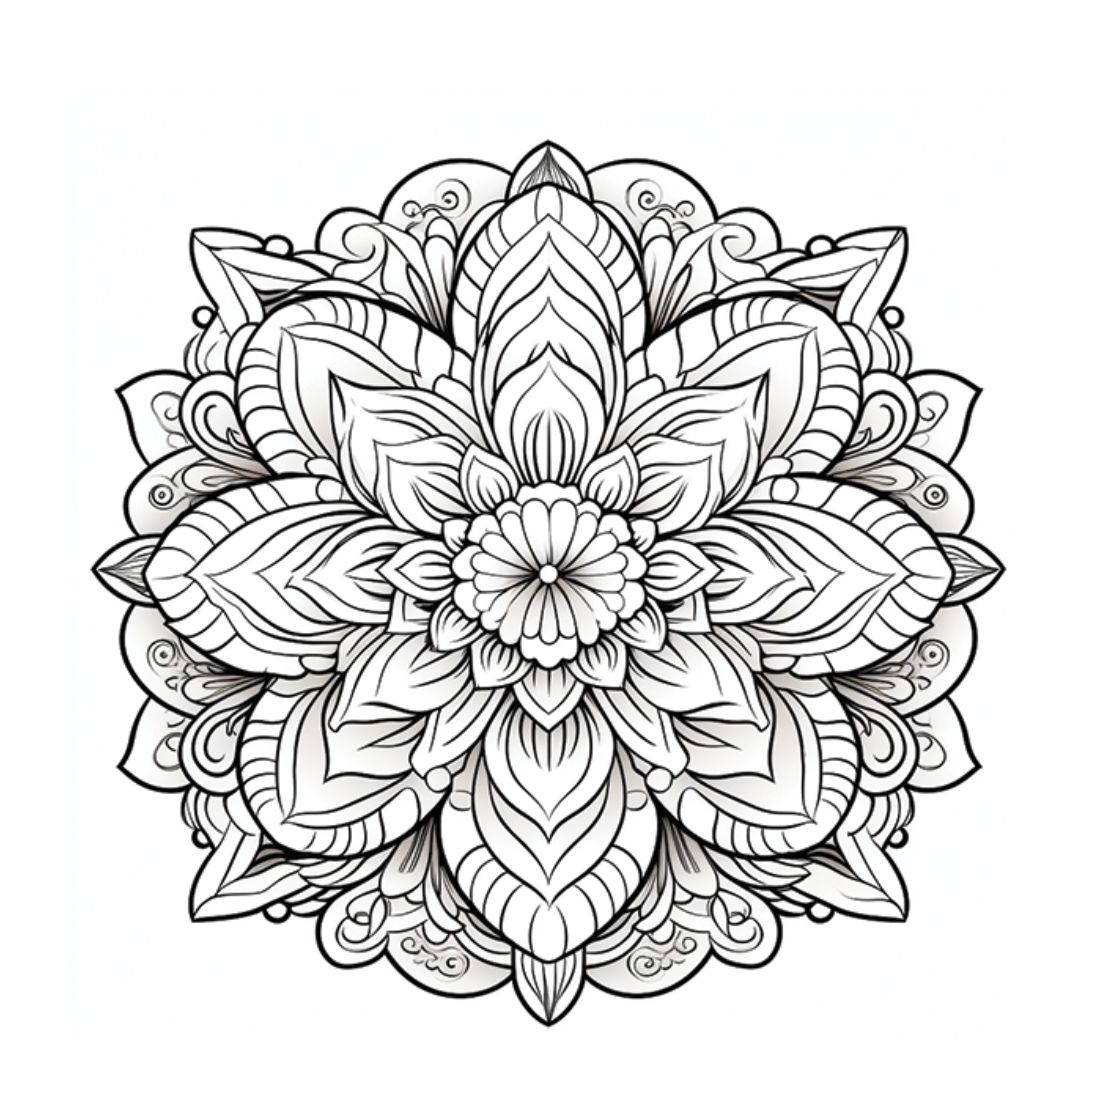 Mandala coloring pages preview image.